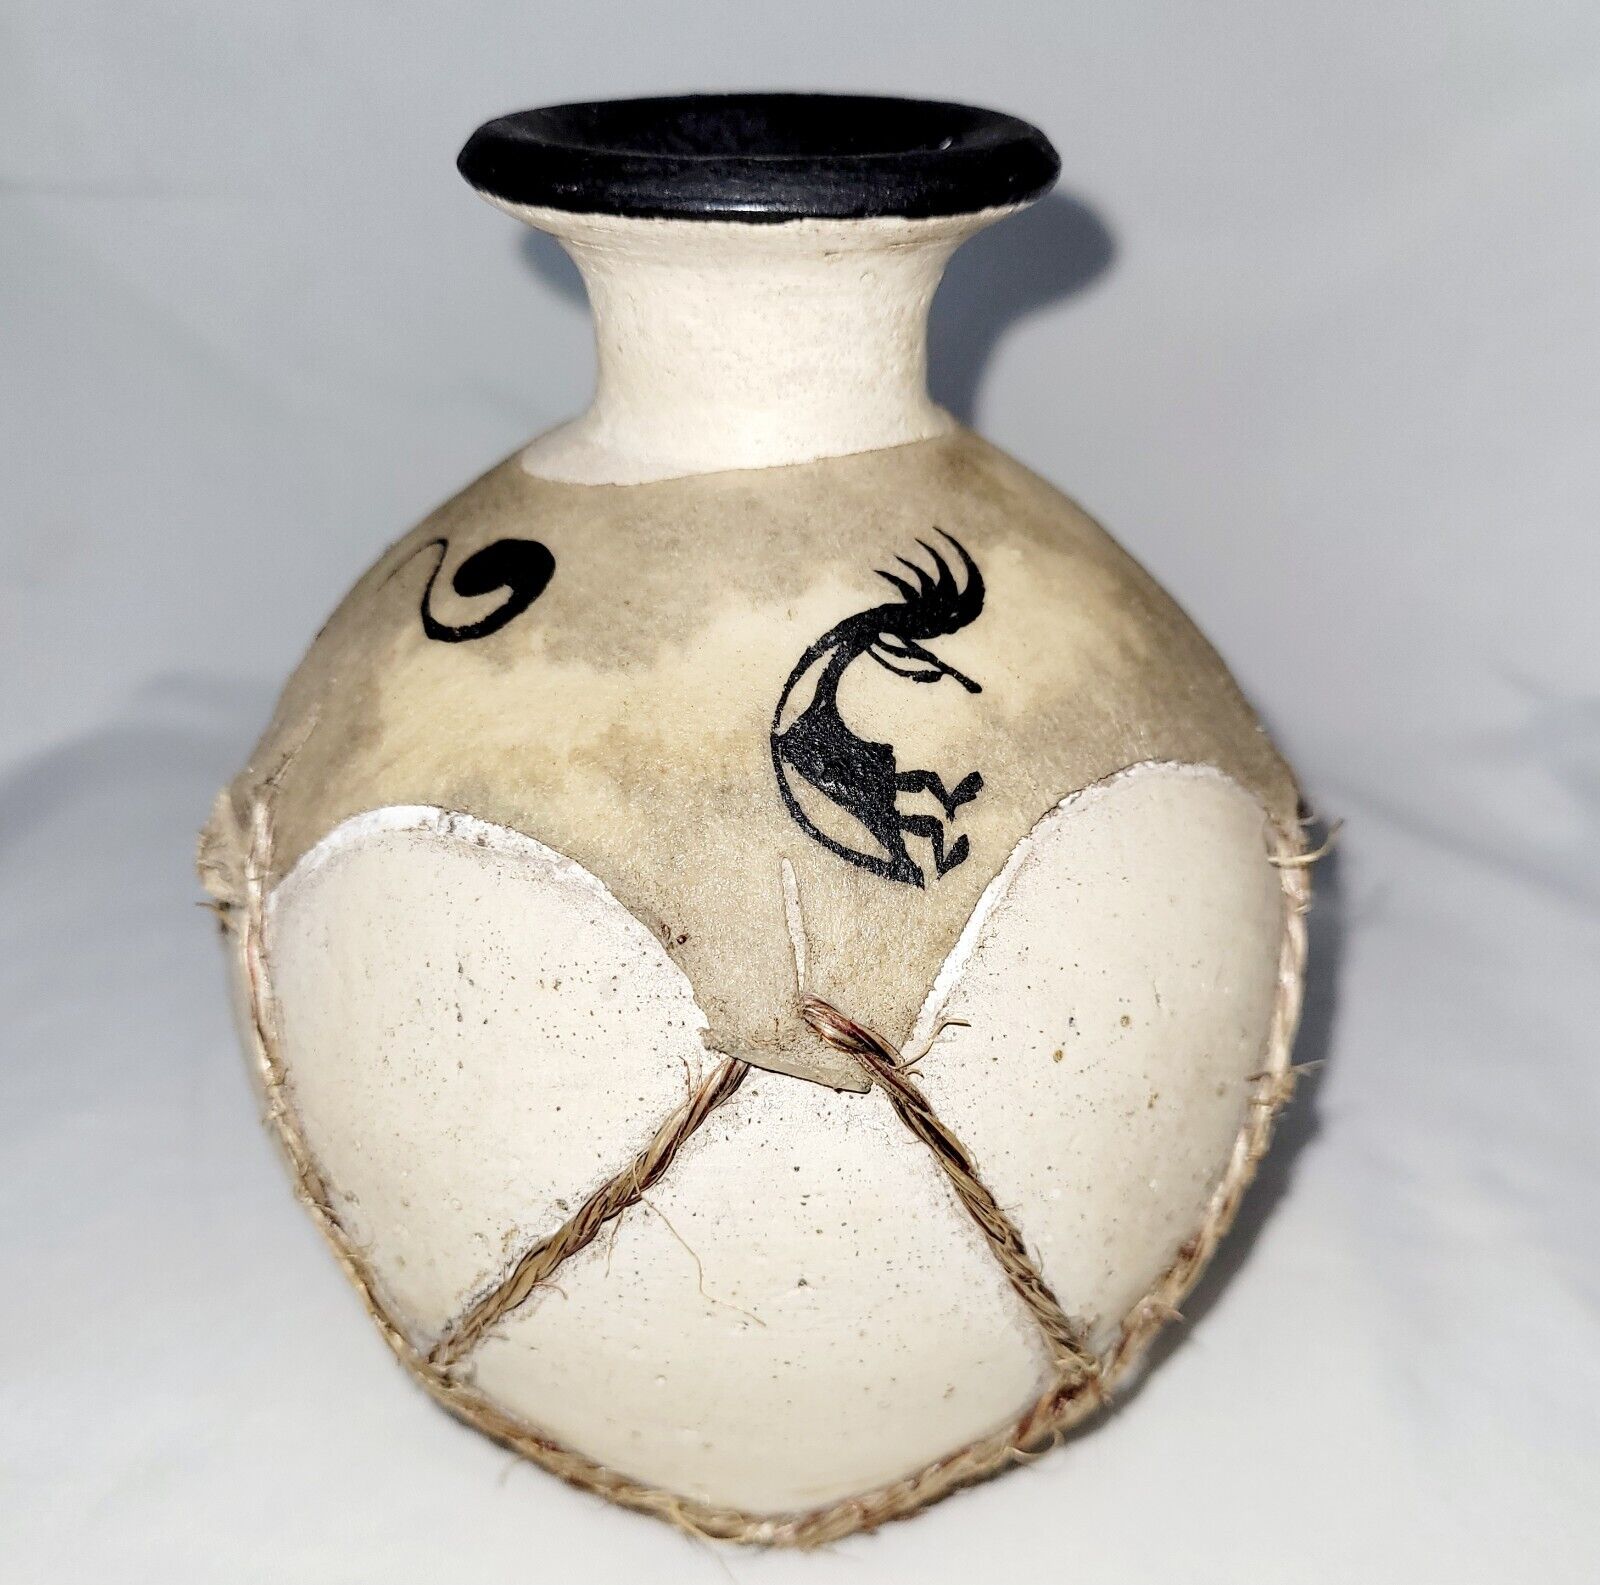 Native American Rustic Kokopelli Pottery Vase With Rawhide & String Wrap Design